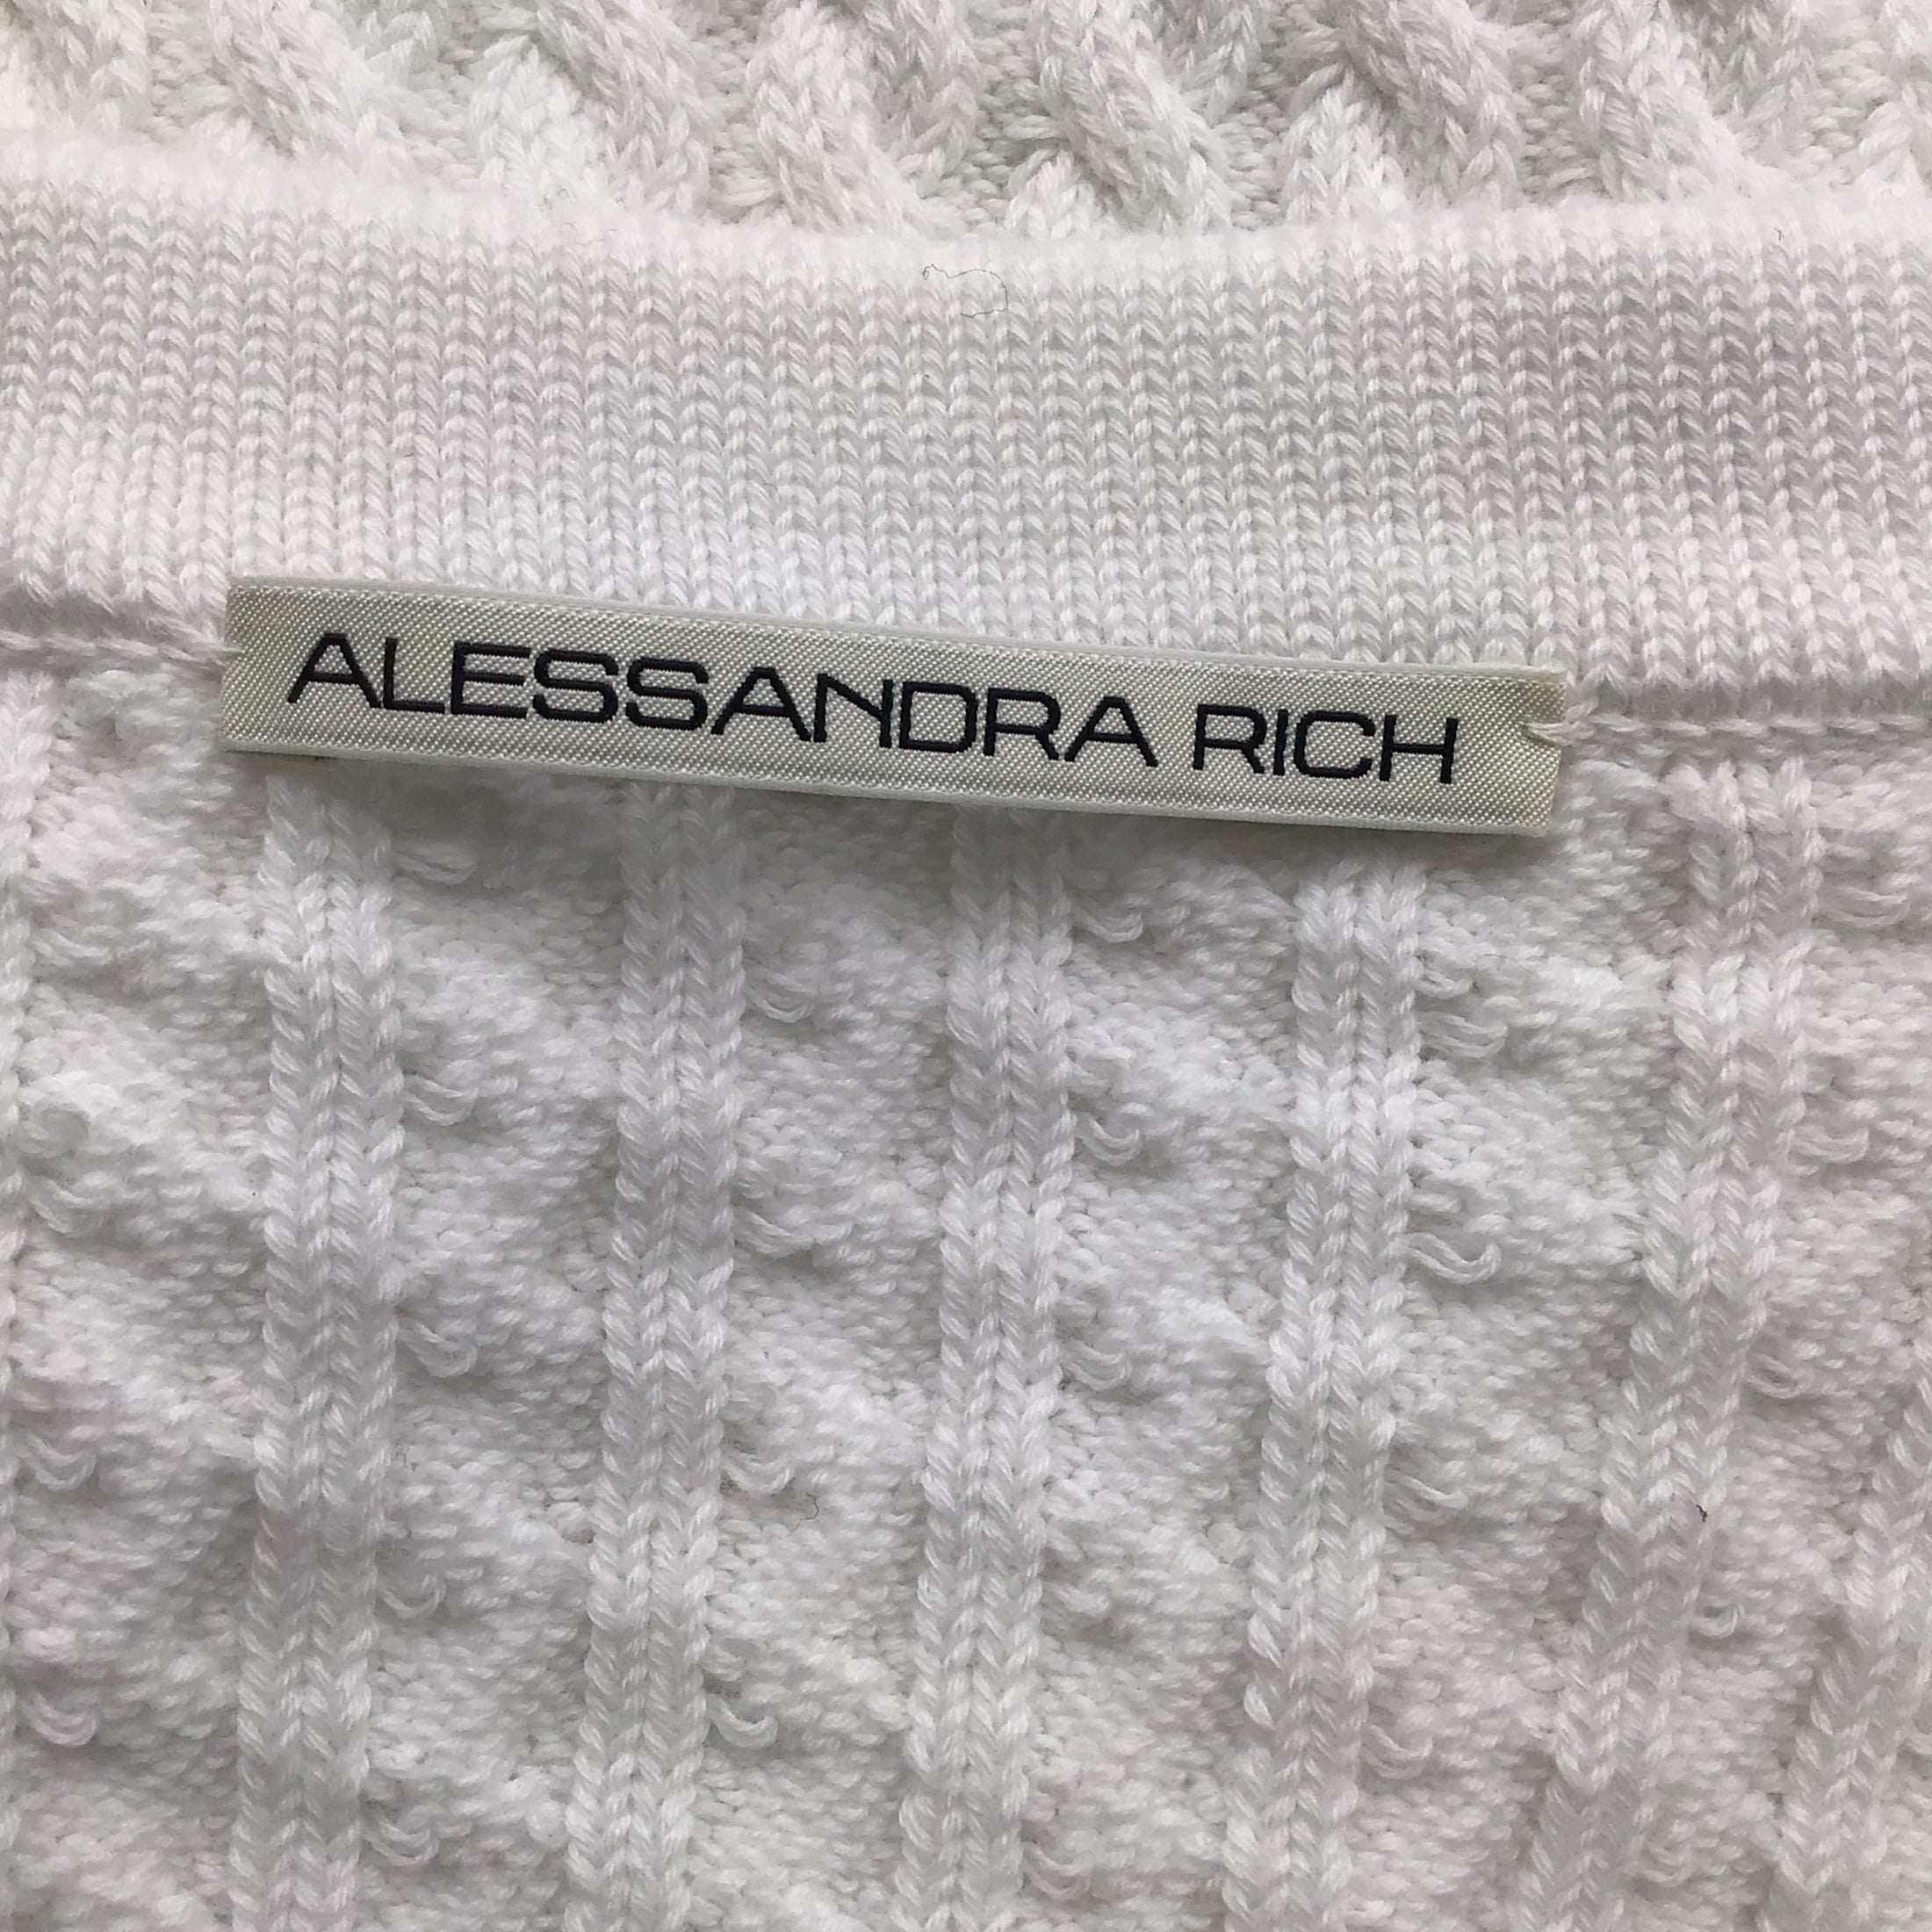 Alessandra Rich White Pearl Buttoned Cable Knit Cardigan Sweater